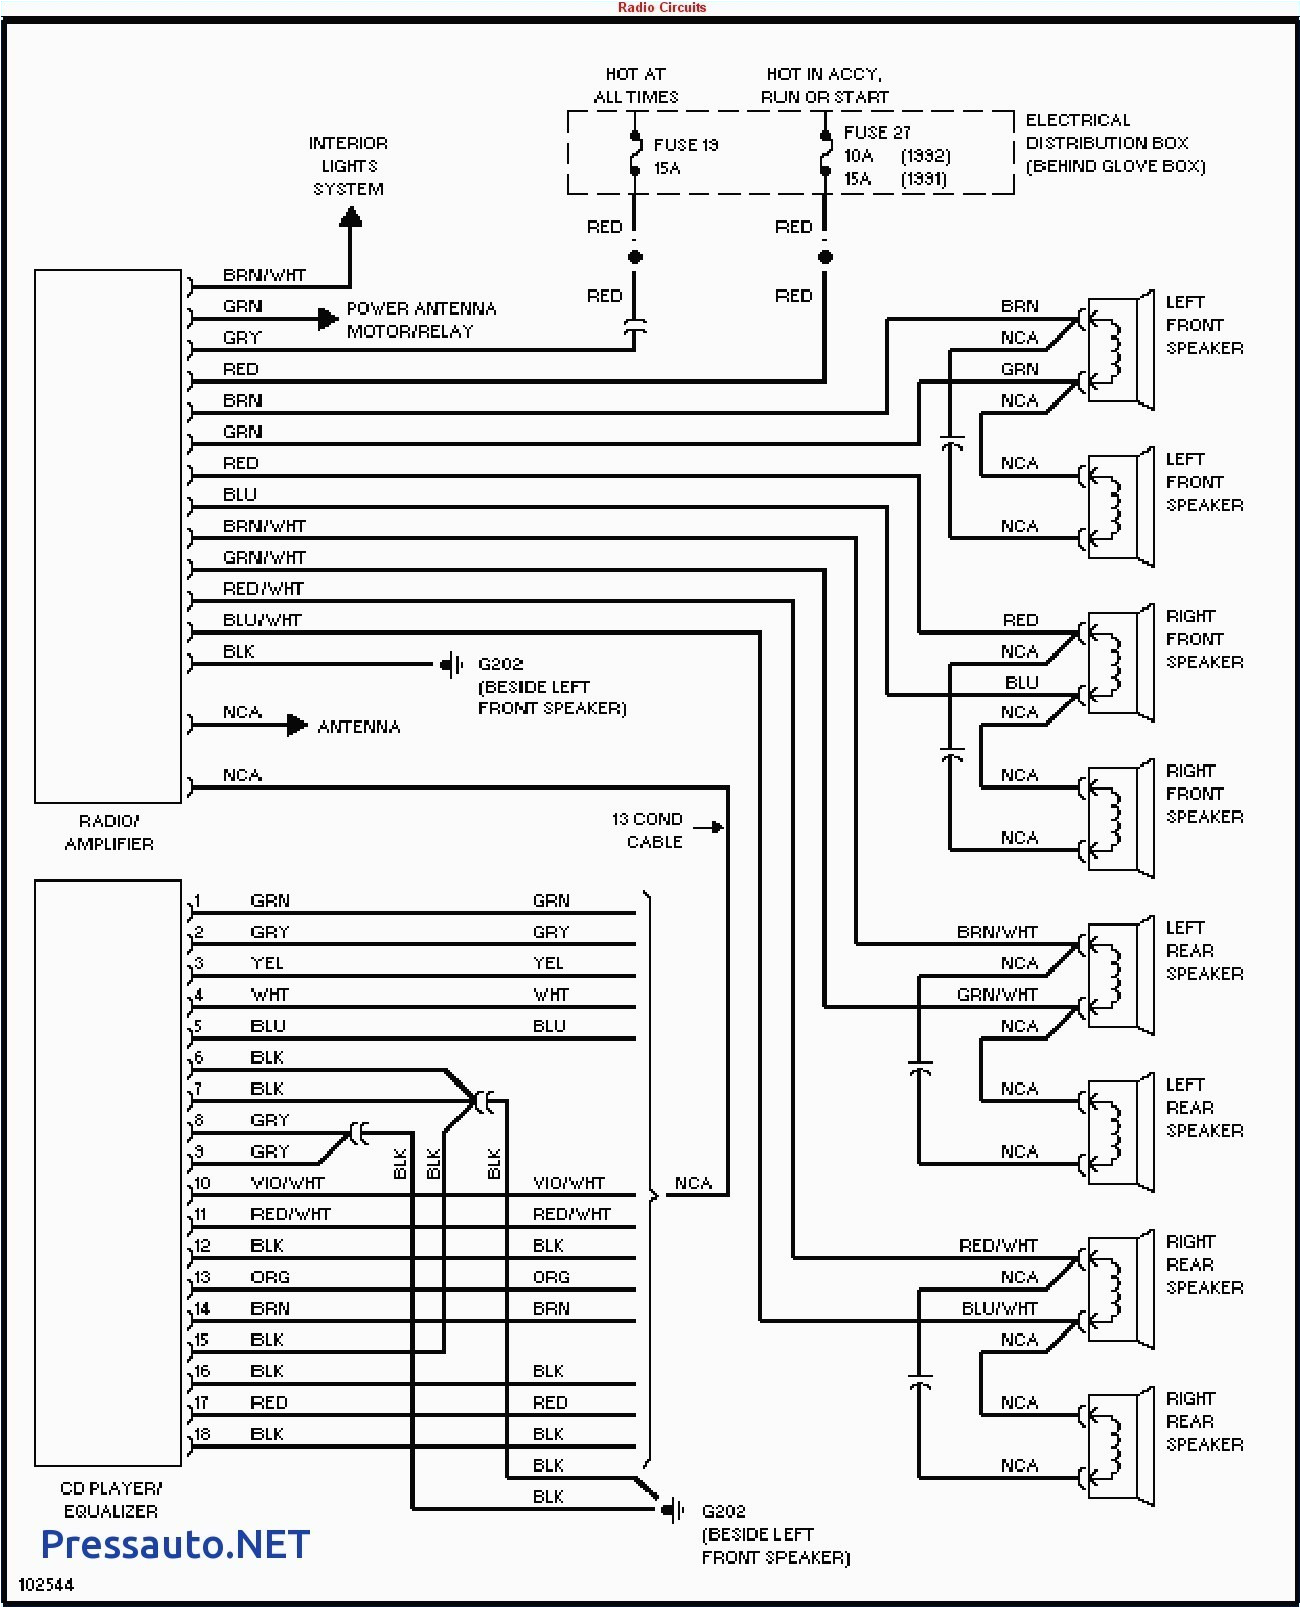 wiring diagram for 1998 jeep cherokee wiring diagram datasource 98 grand cherokee radio wiring diagram 1998